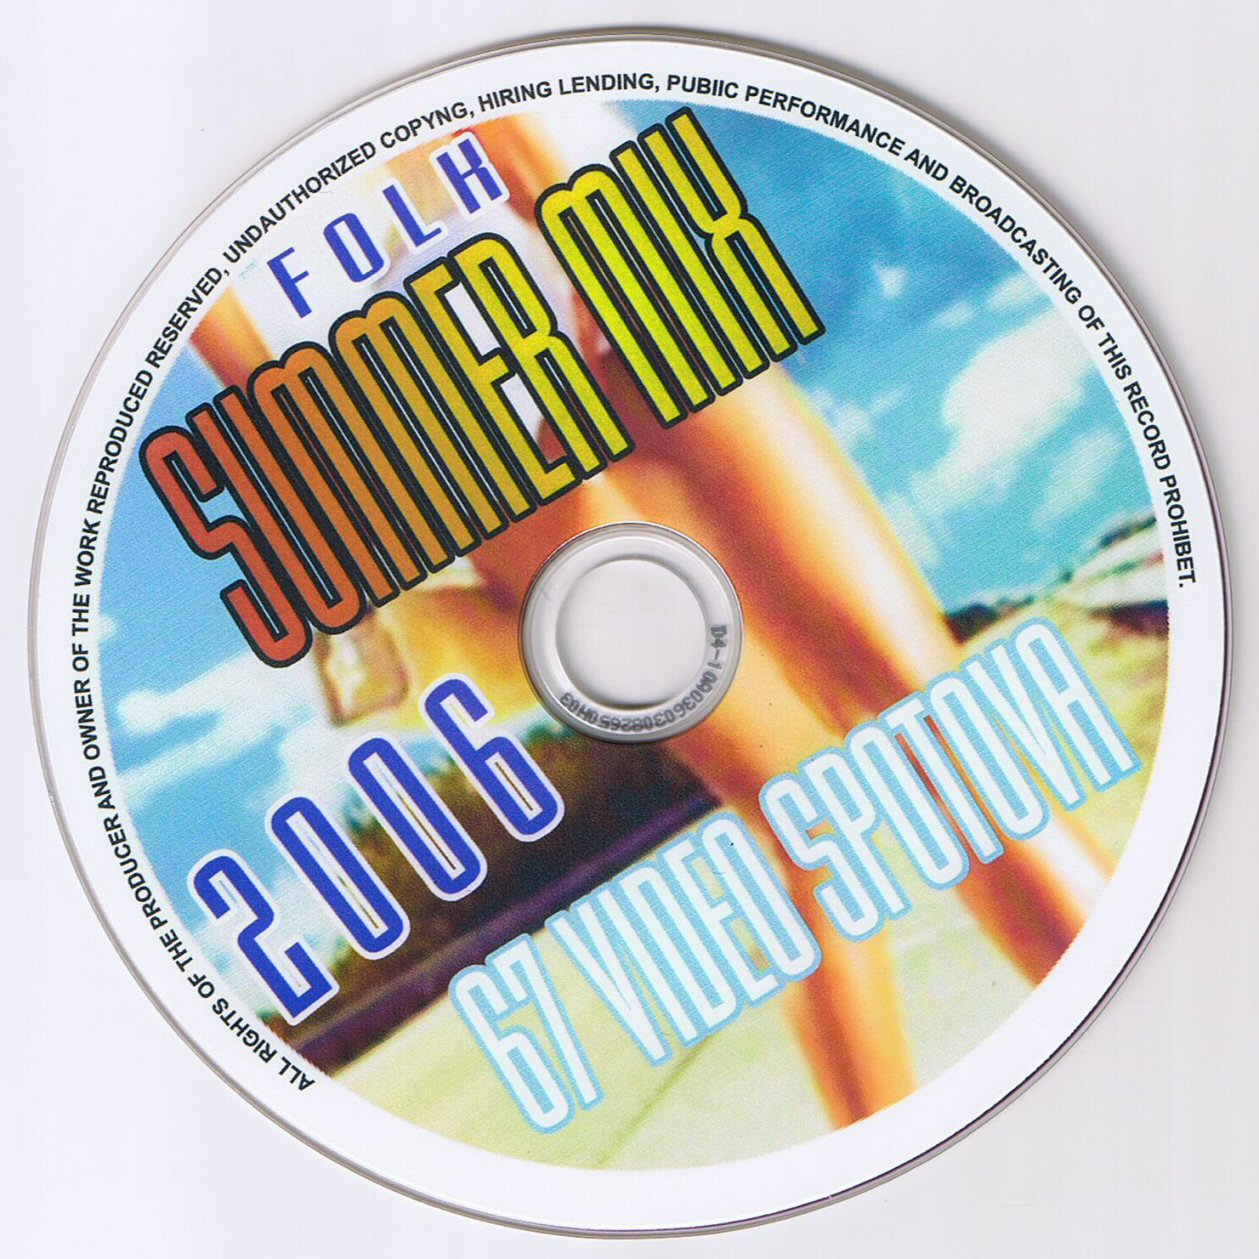 Click to view full size image -  DVD Cover - F - DVD - FOLK SUMMERMIX2006 - CD - DVD - FOLK SUMMERMIX2006 - CD.JPG